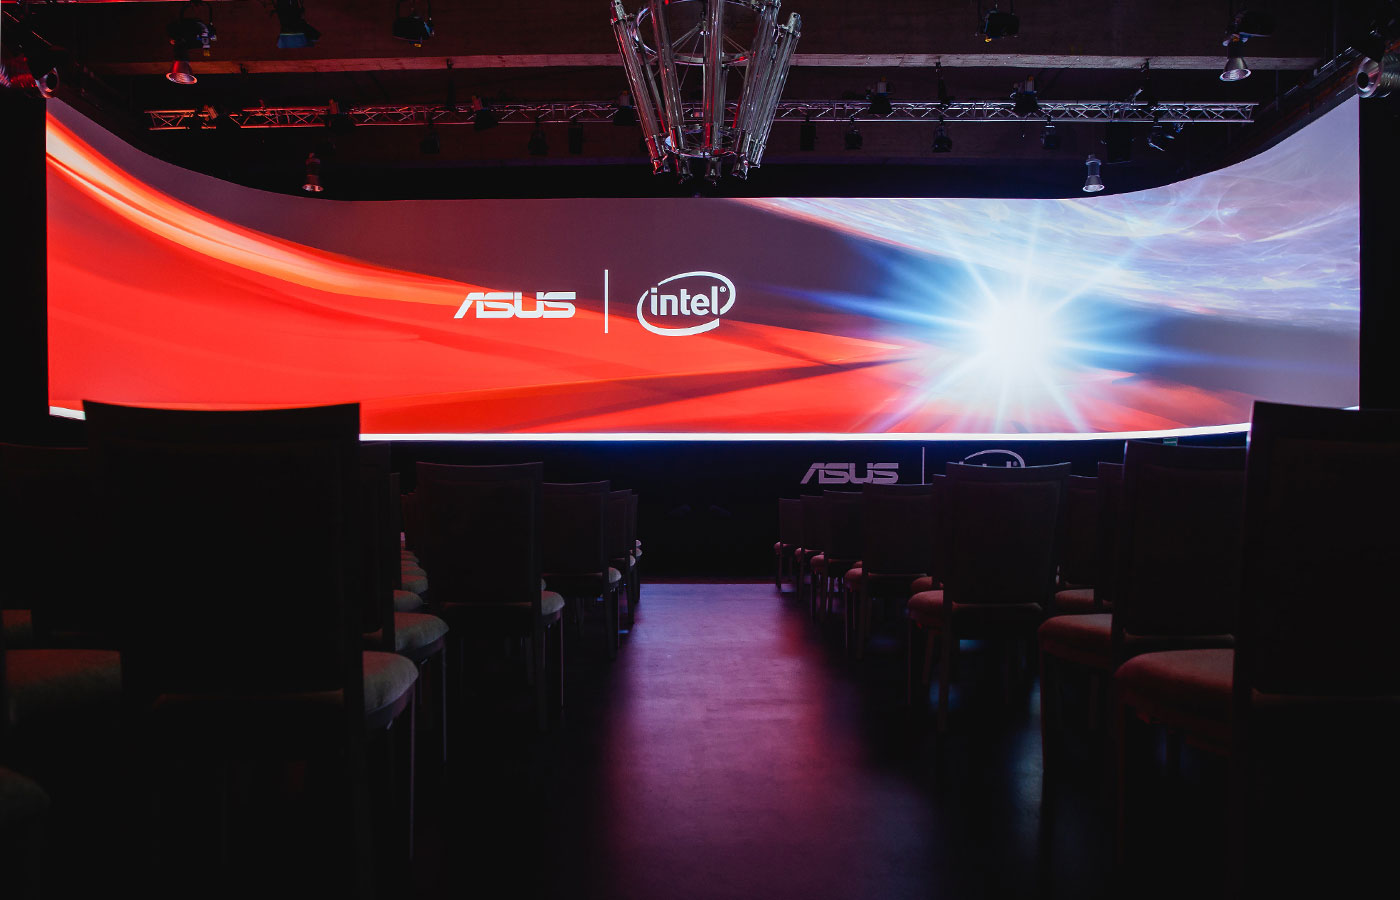 Asus – International Press Conference for IFA 2015